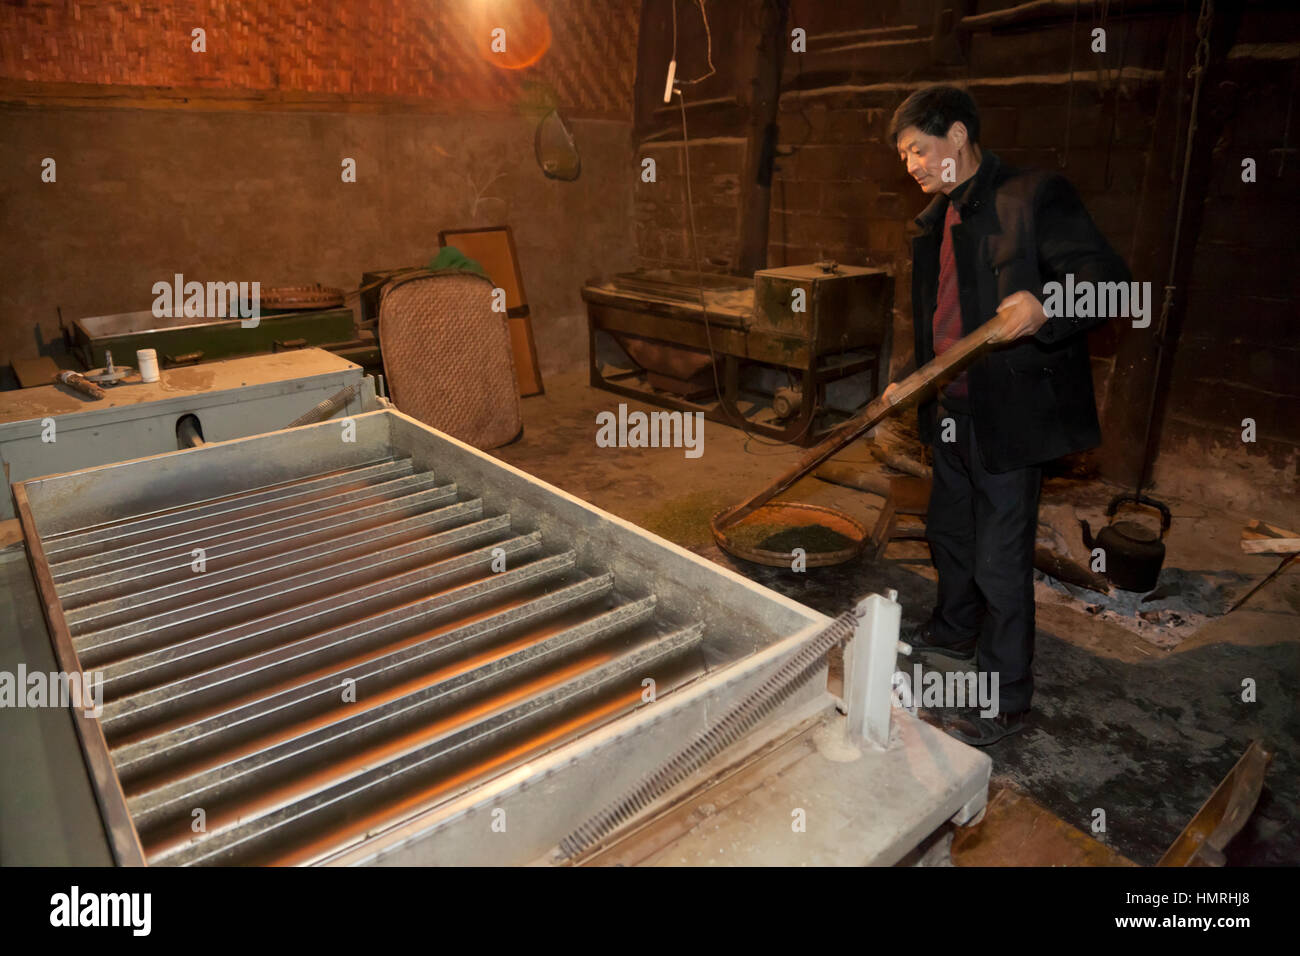 A man singes tender buds of tea in heated jiggling trays of grooved electric machine to prepare the green tea for packaging and selling in China. Stock Photo